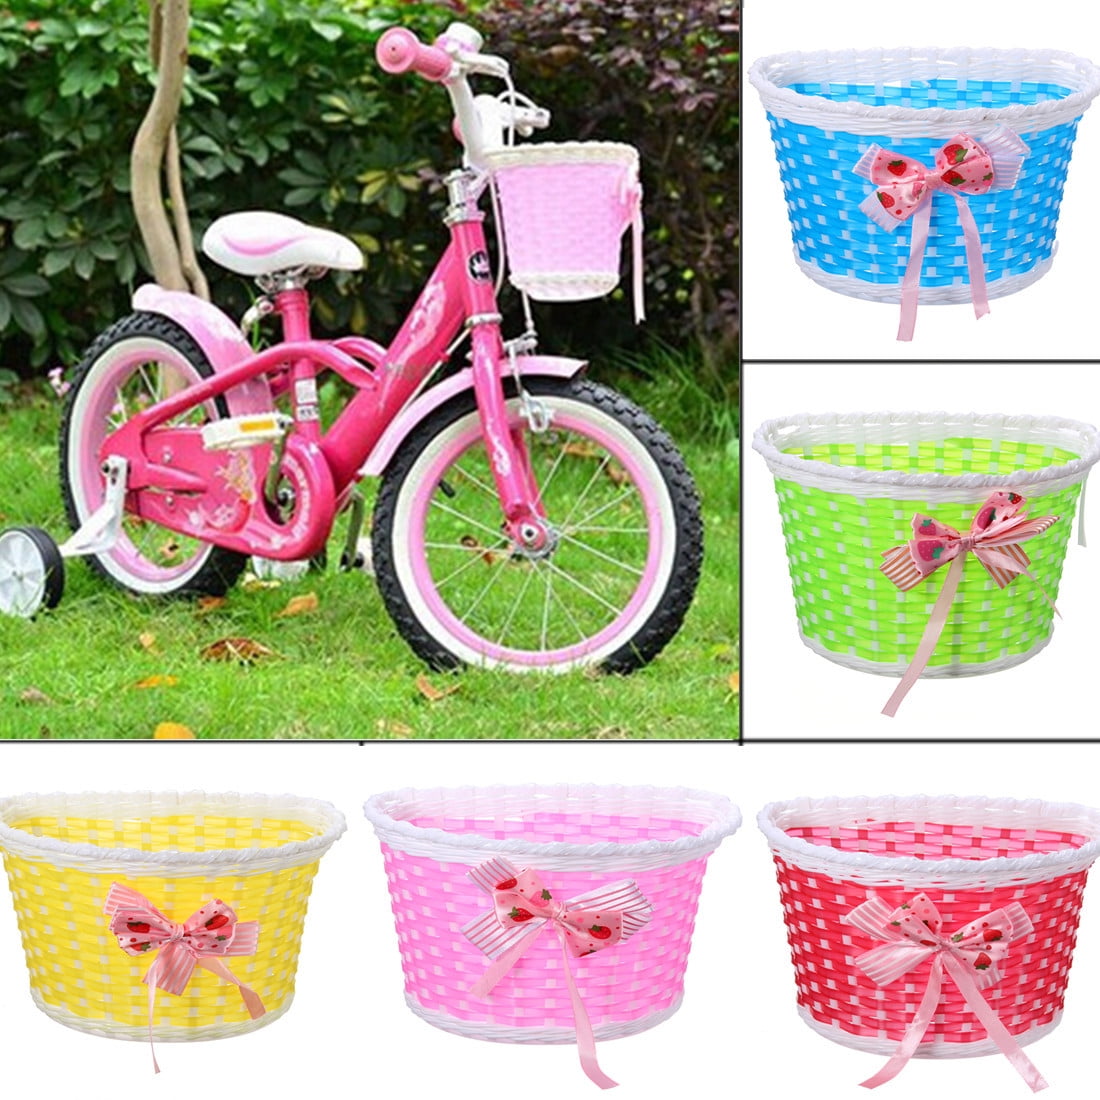 Wicker Leather Straps Shopping Box Childrens Cycle Kids Bike Bicycle Basket